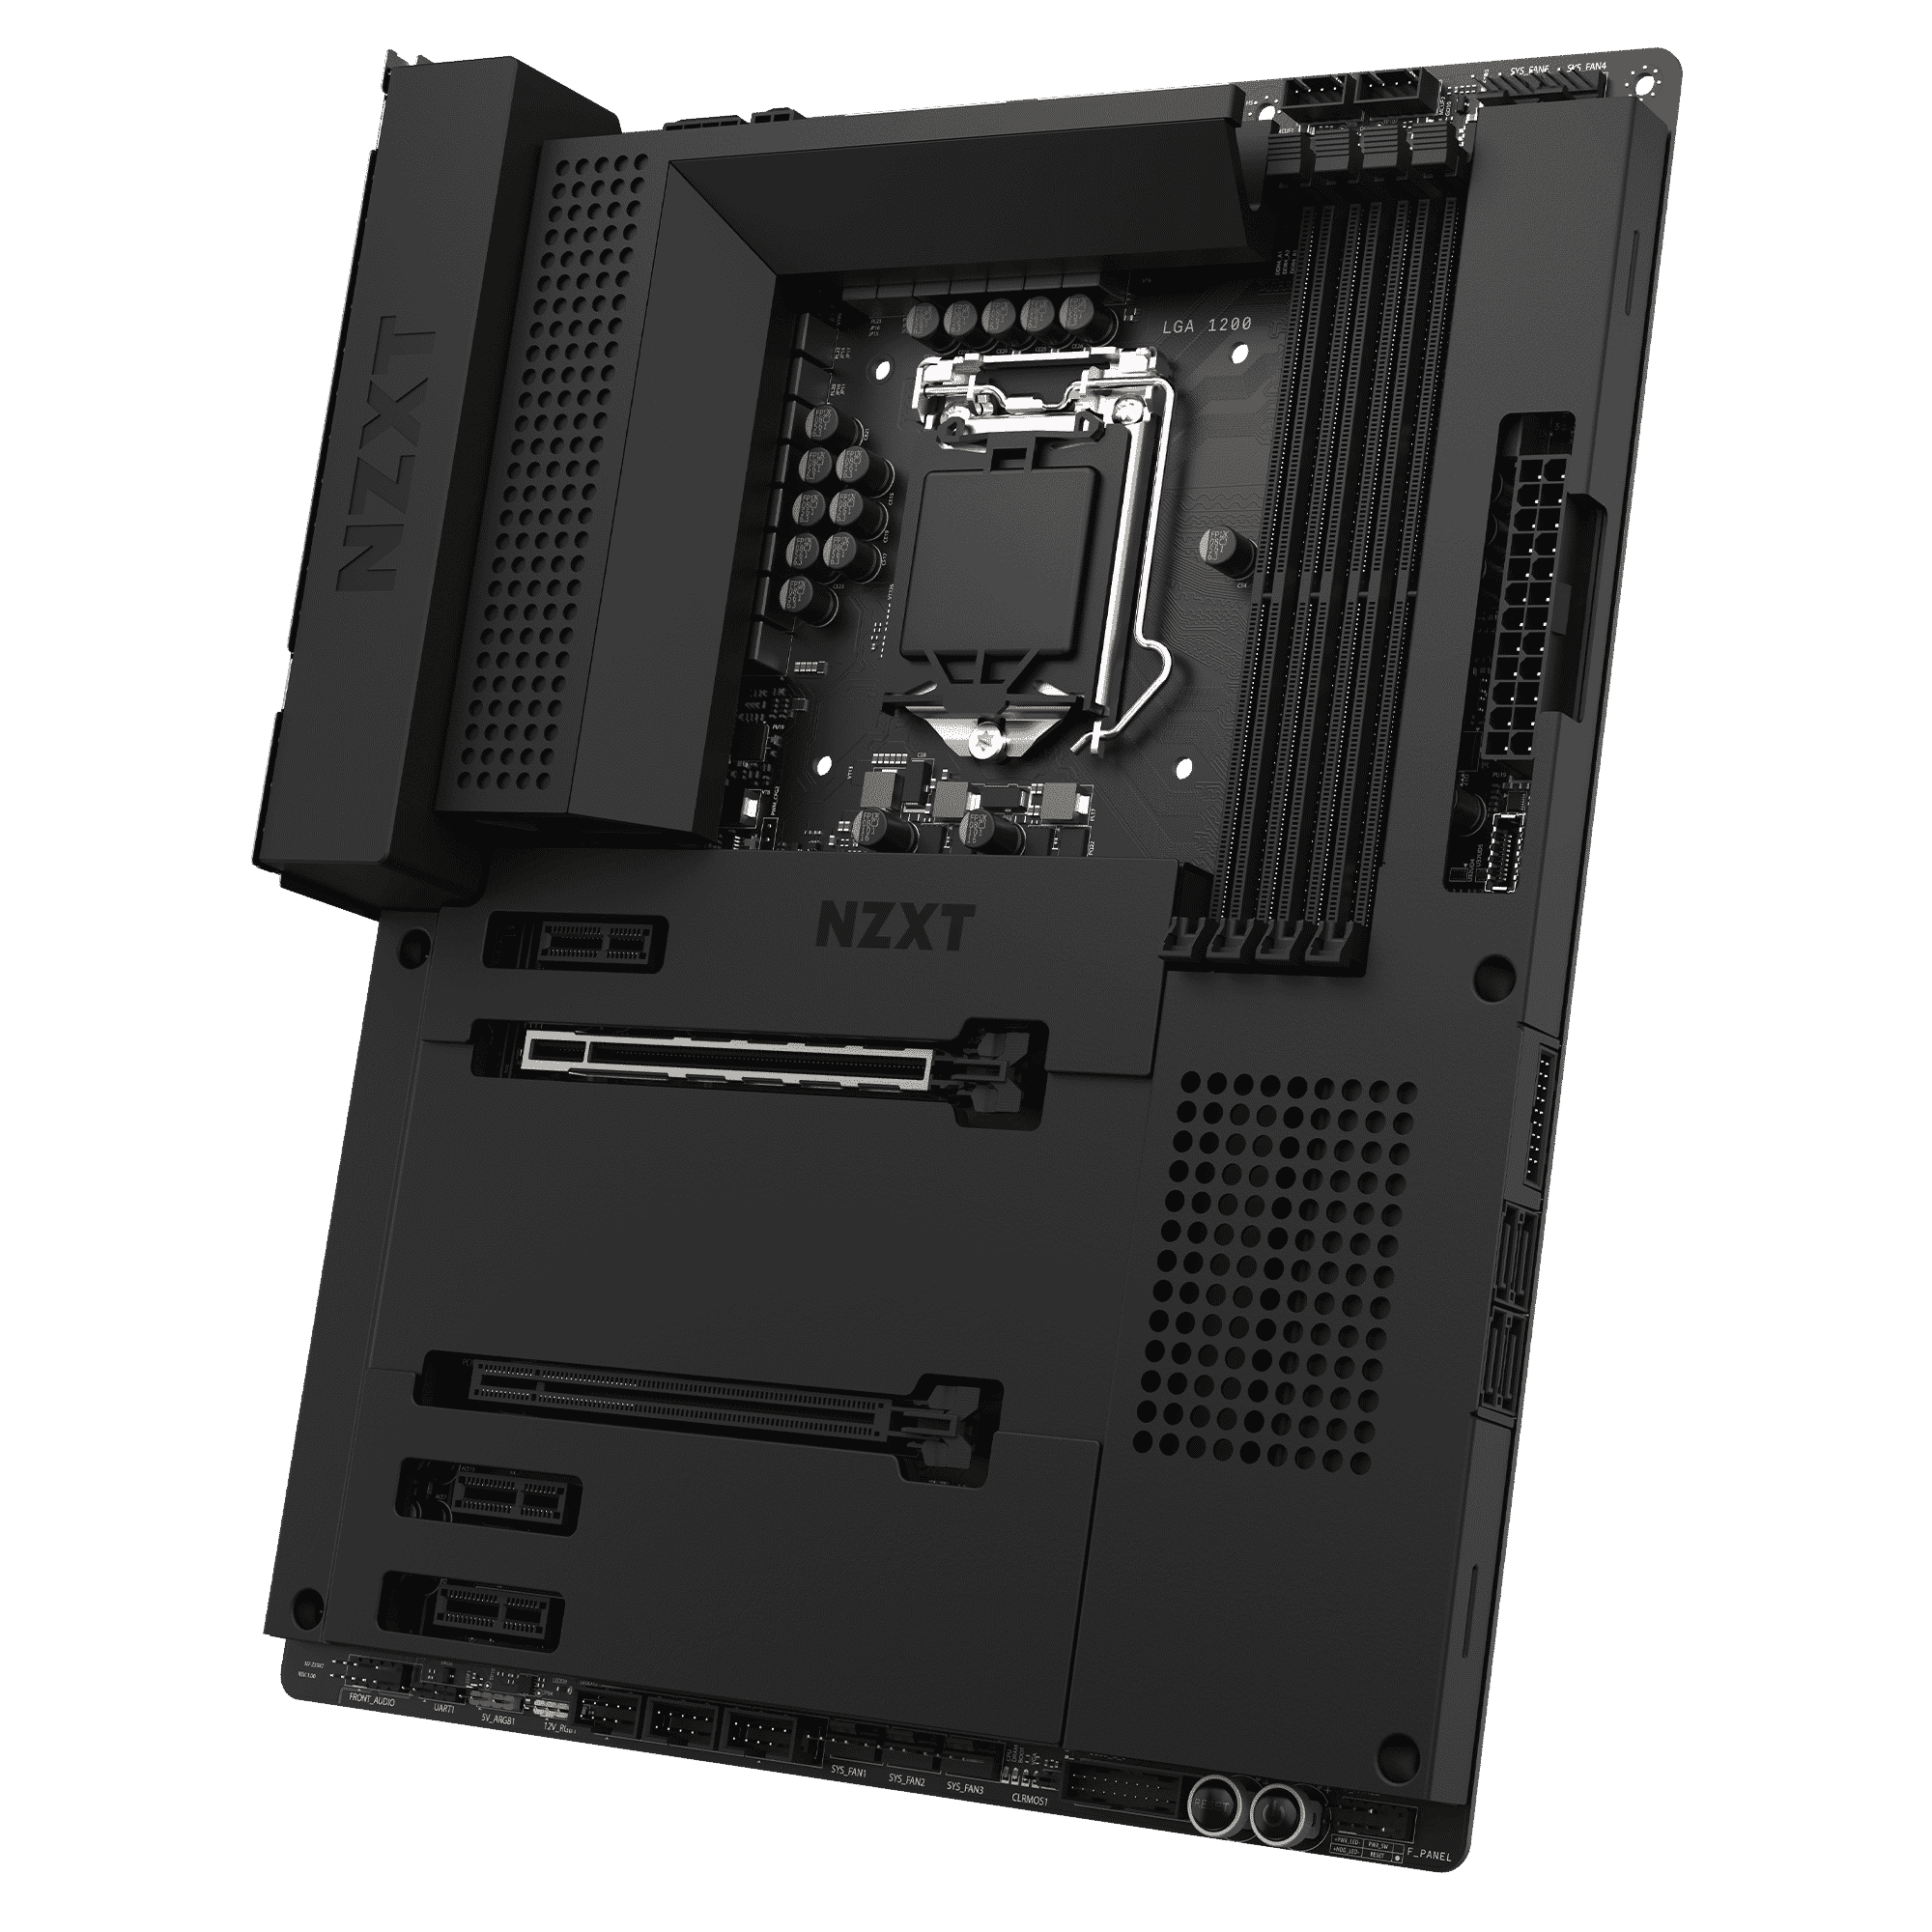 NZXT Announces Availability of N7 Z590 ATX Motherboards - The FPS Review